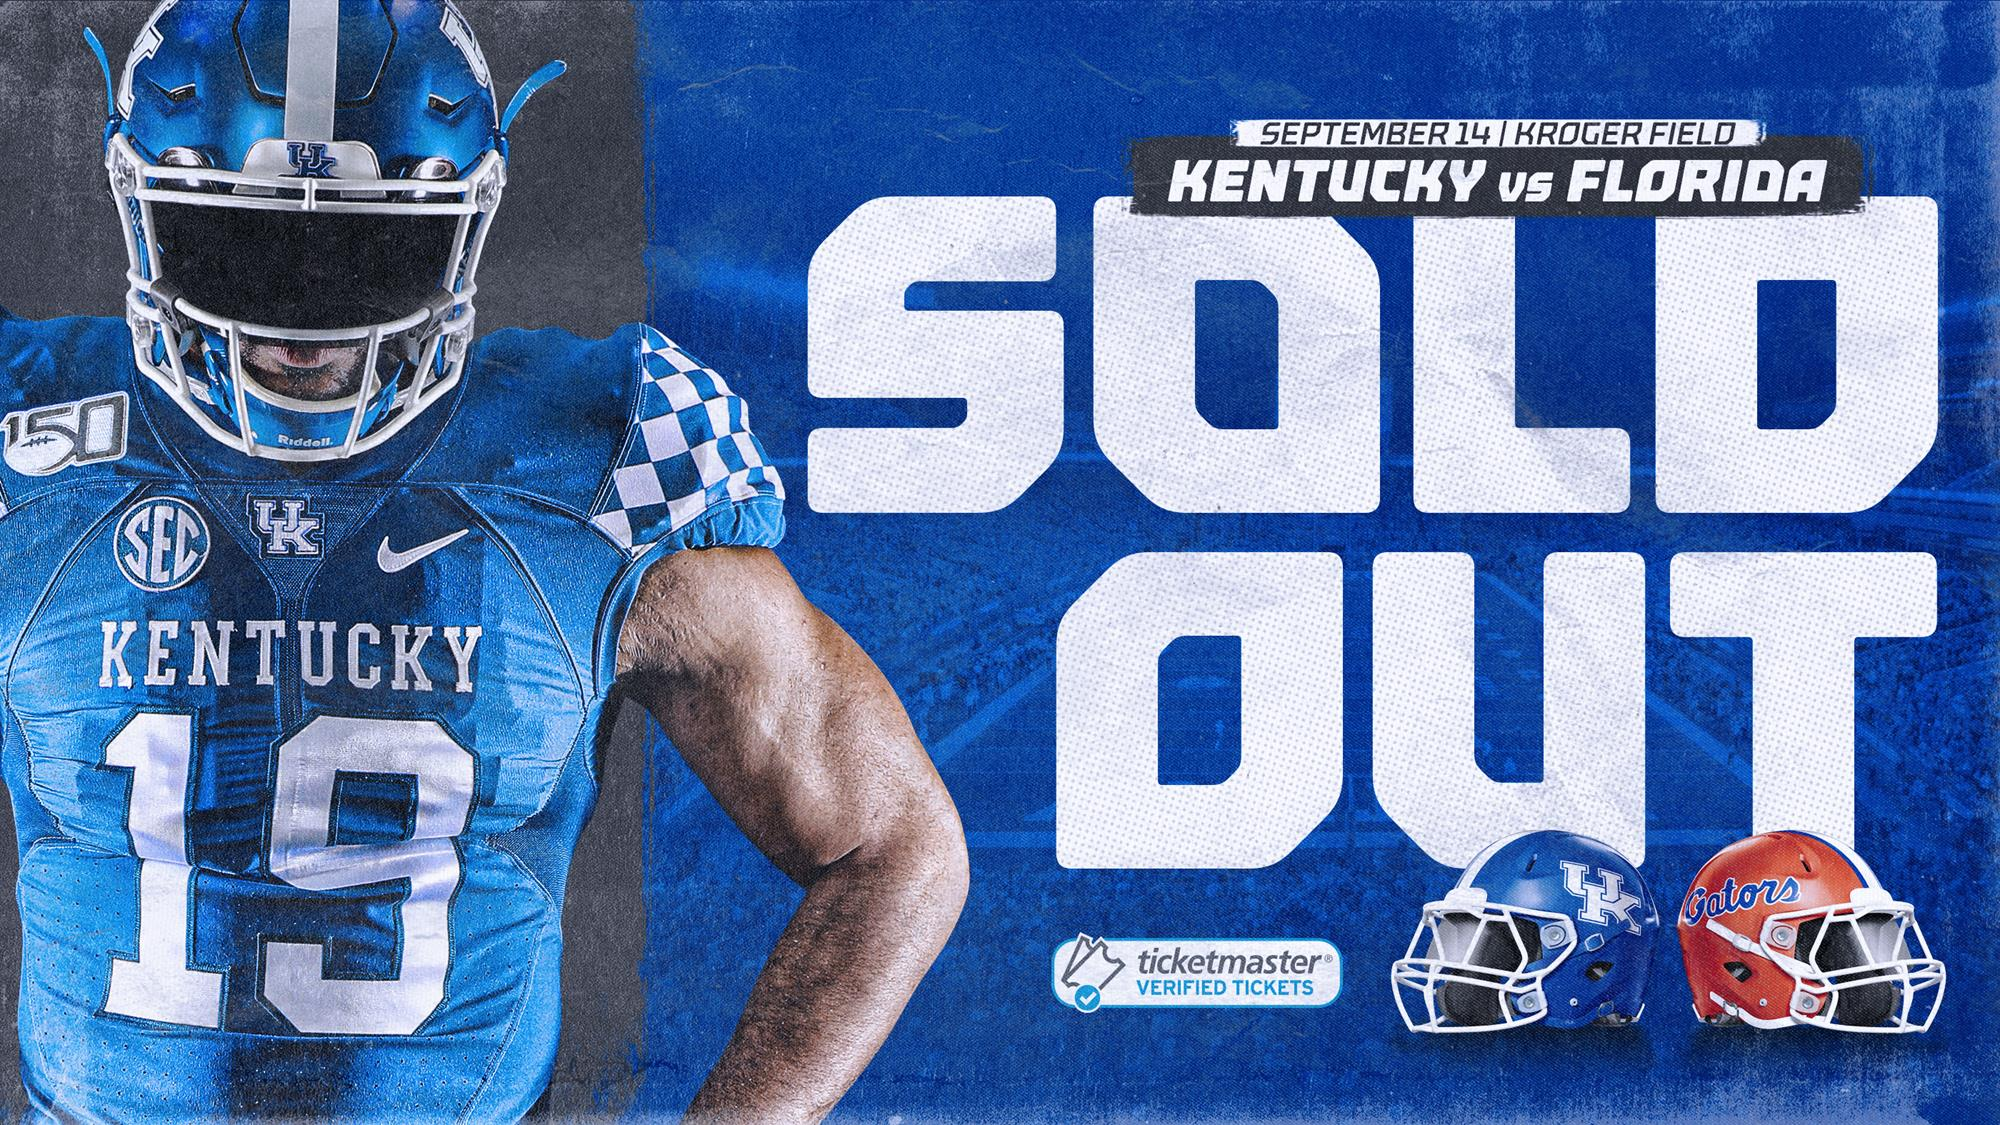 UKFB: Florida Game Sold Out